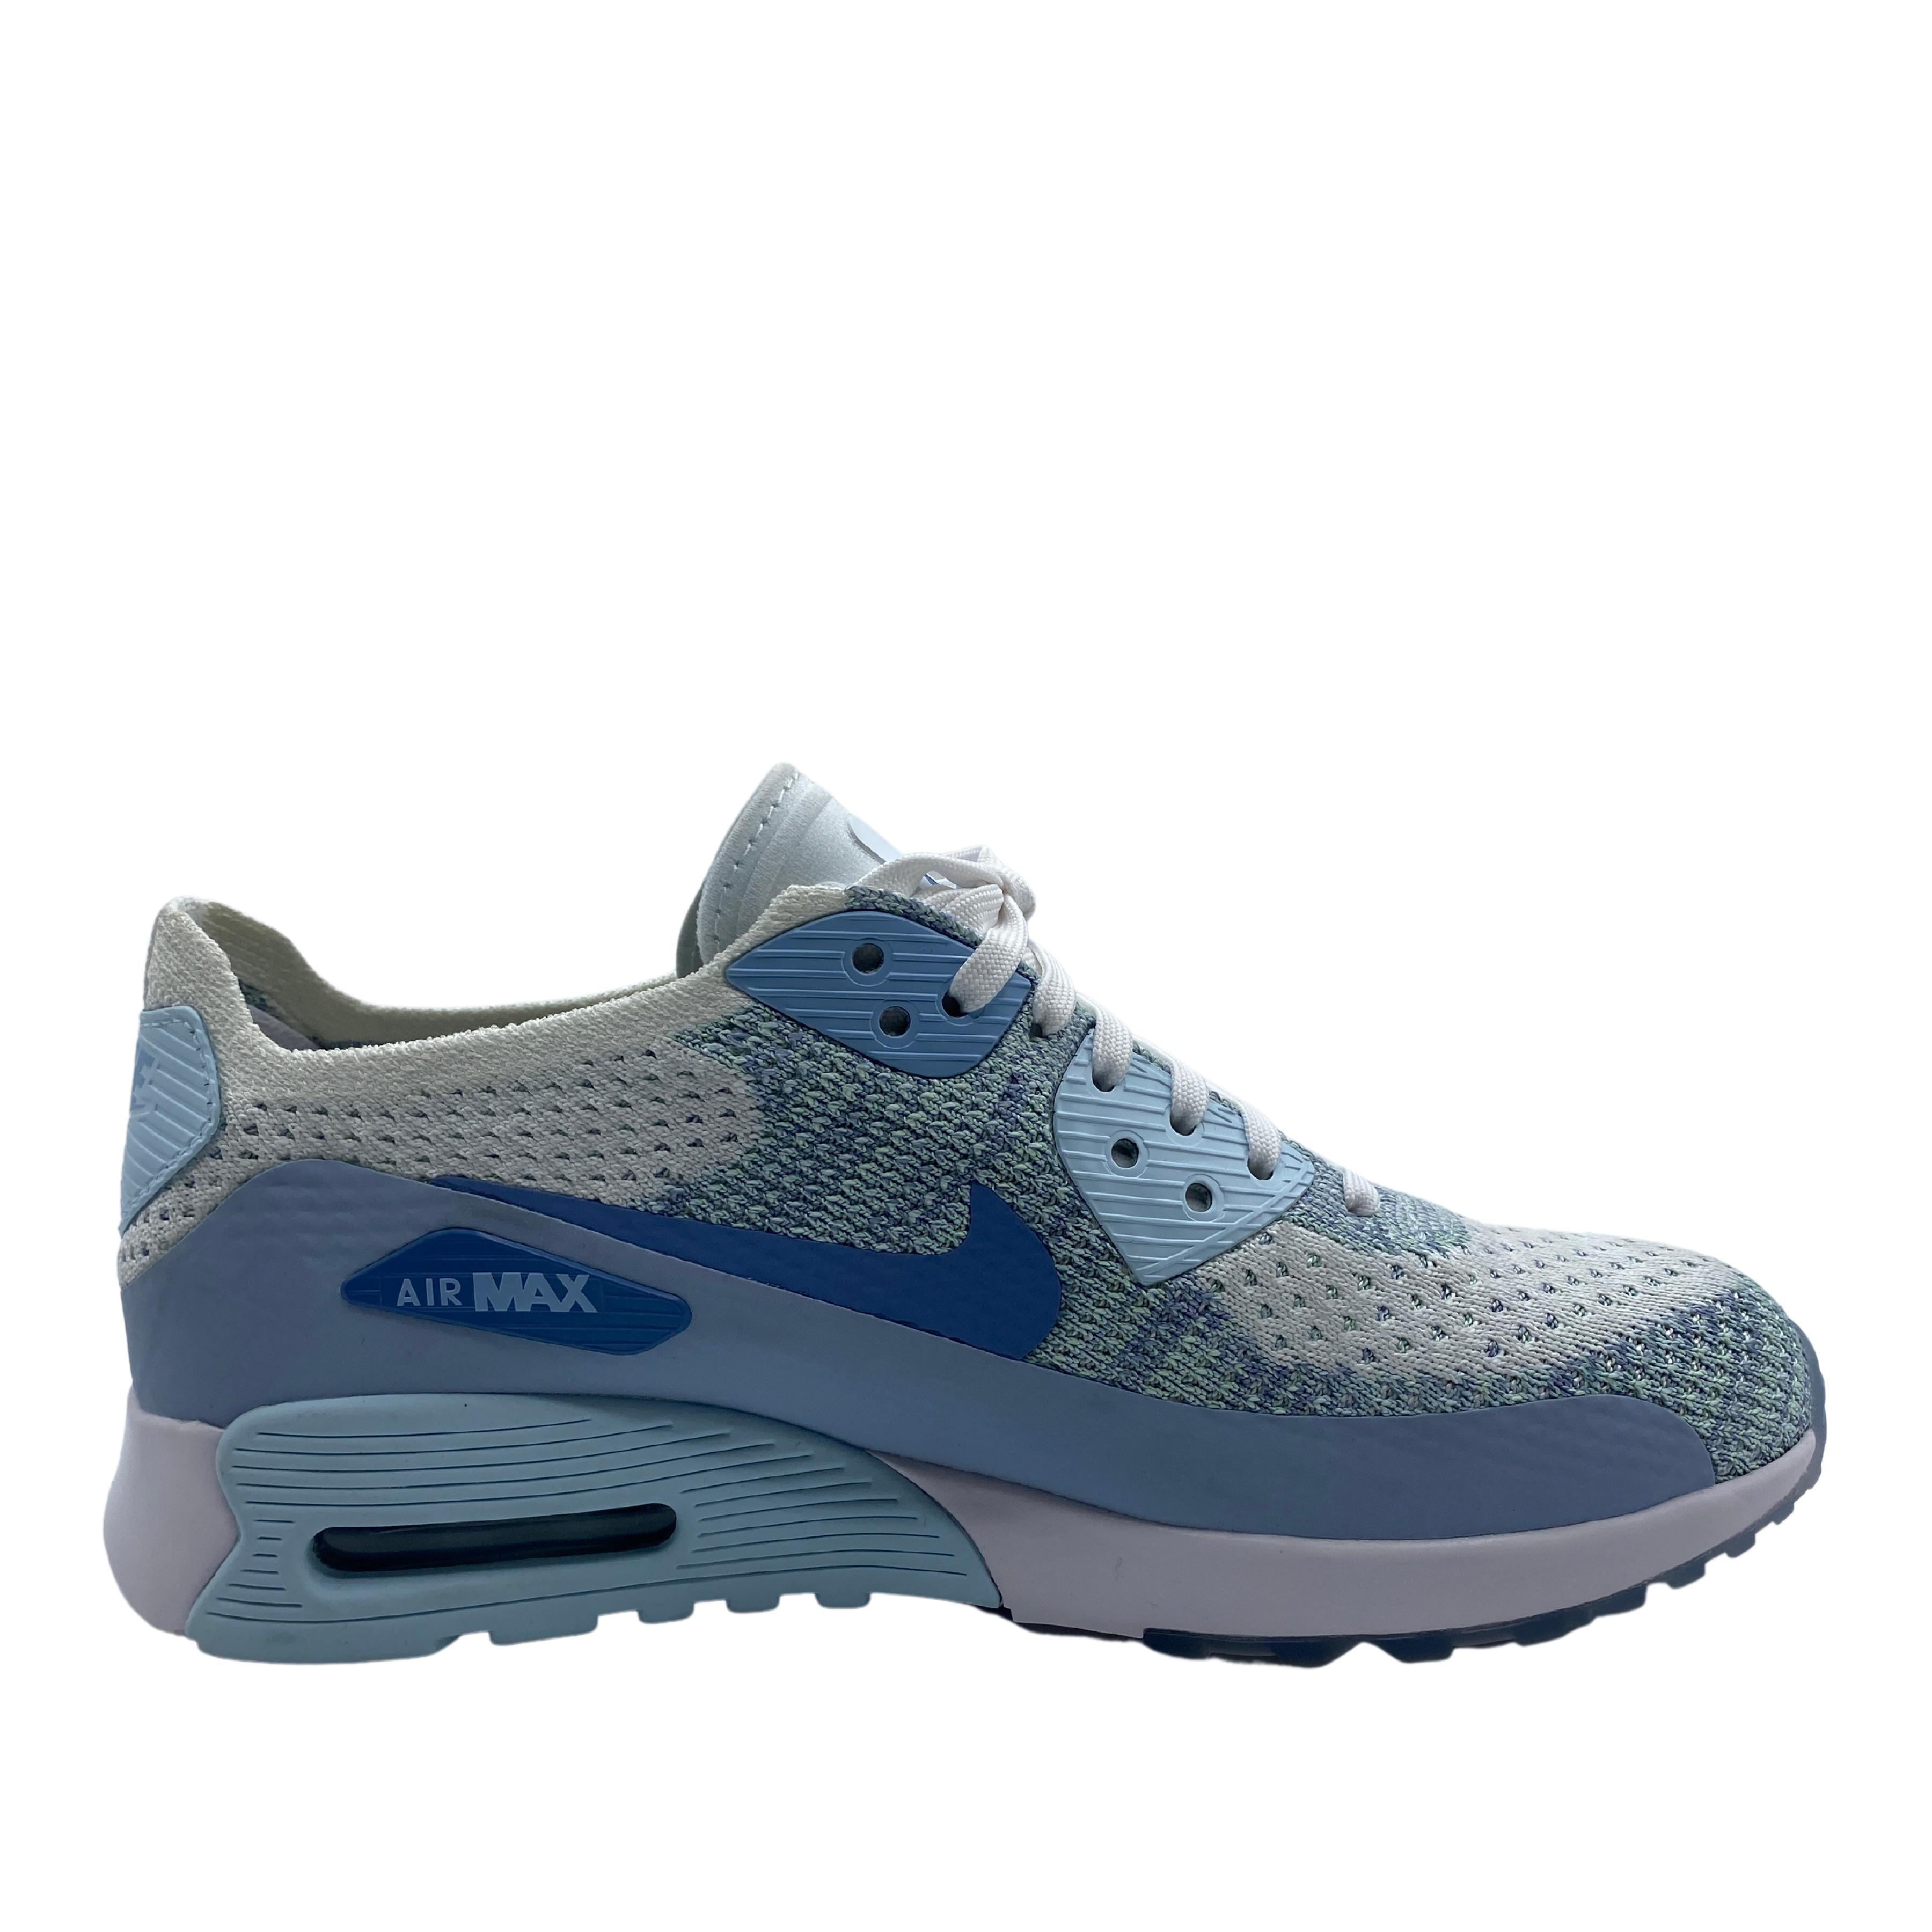 Nike Air Max 90 Ultra 2.0 Flyknit in White/Blue UK 5.5